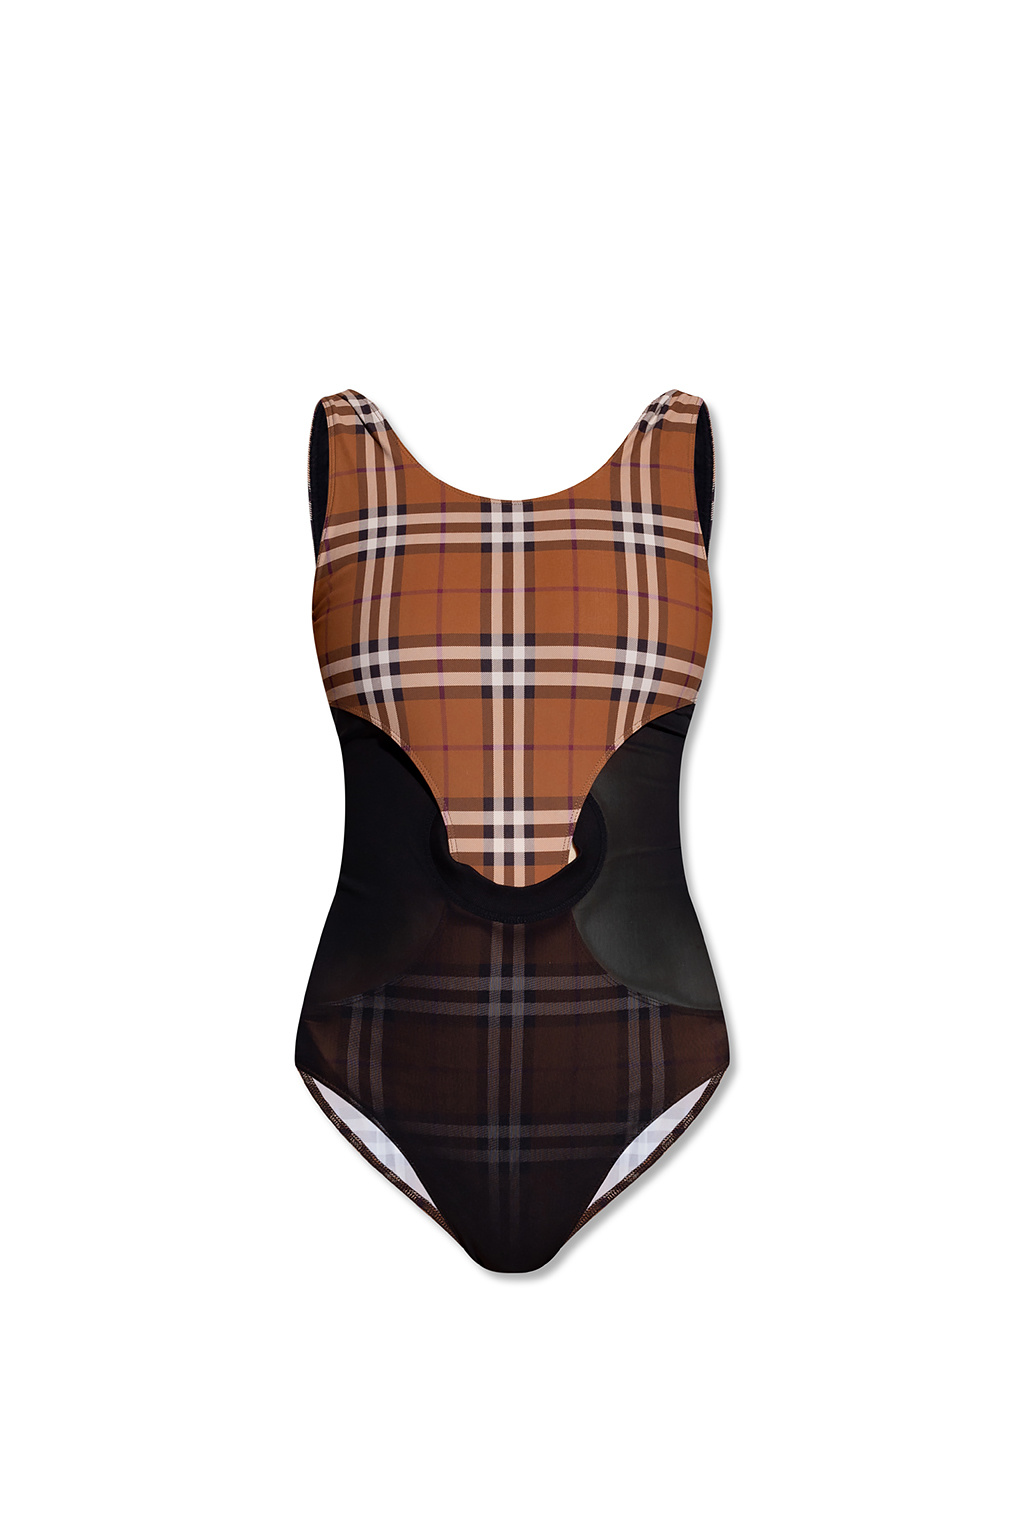 Burberry ‘Madison’ checked body